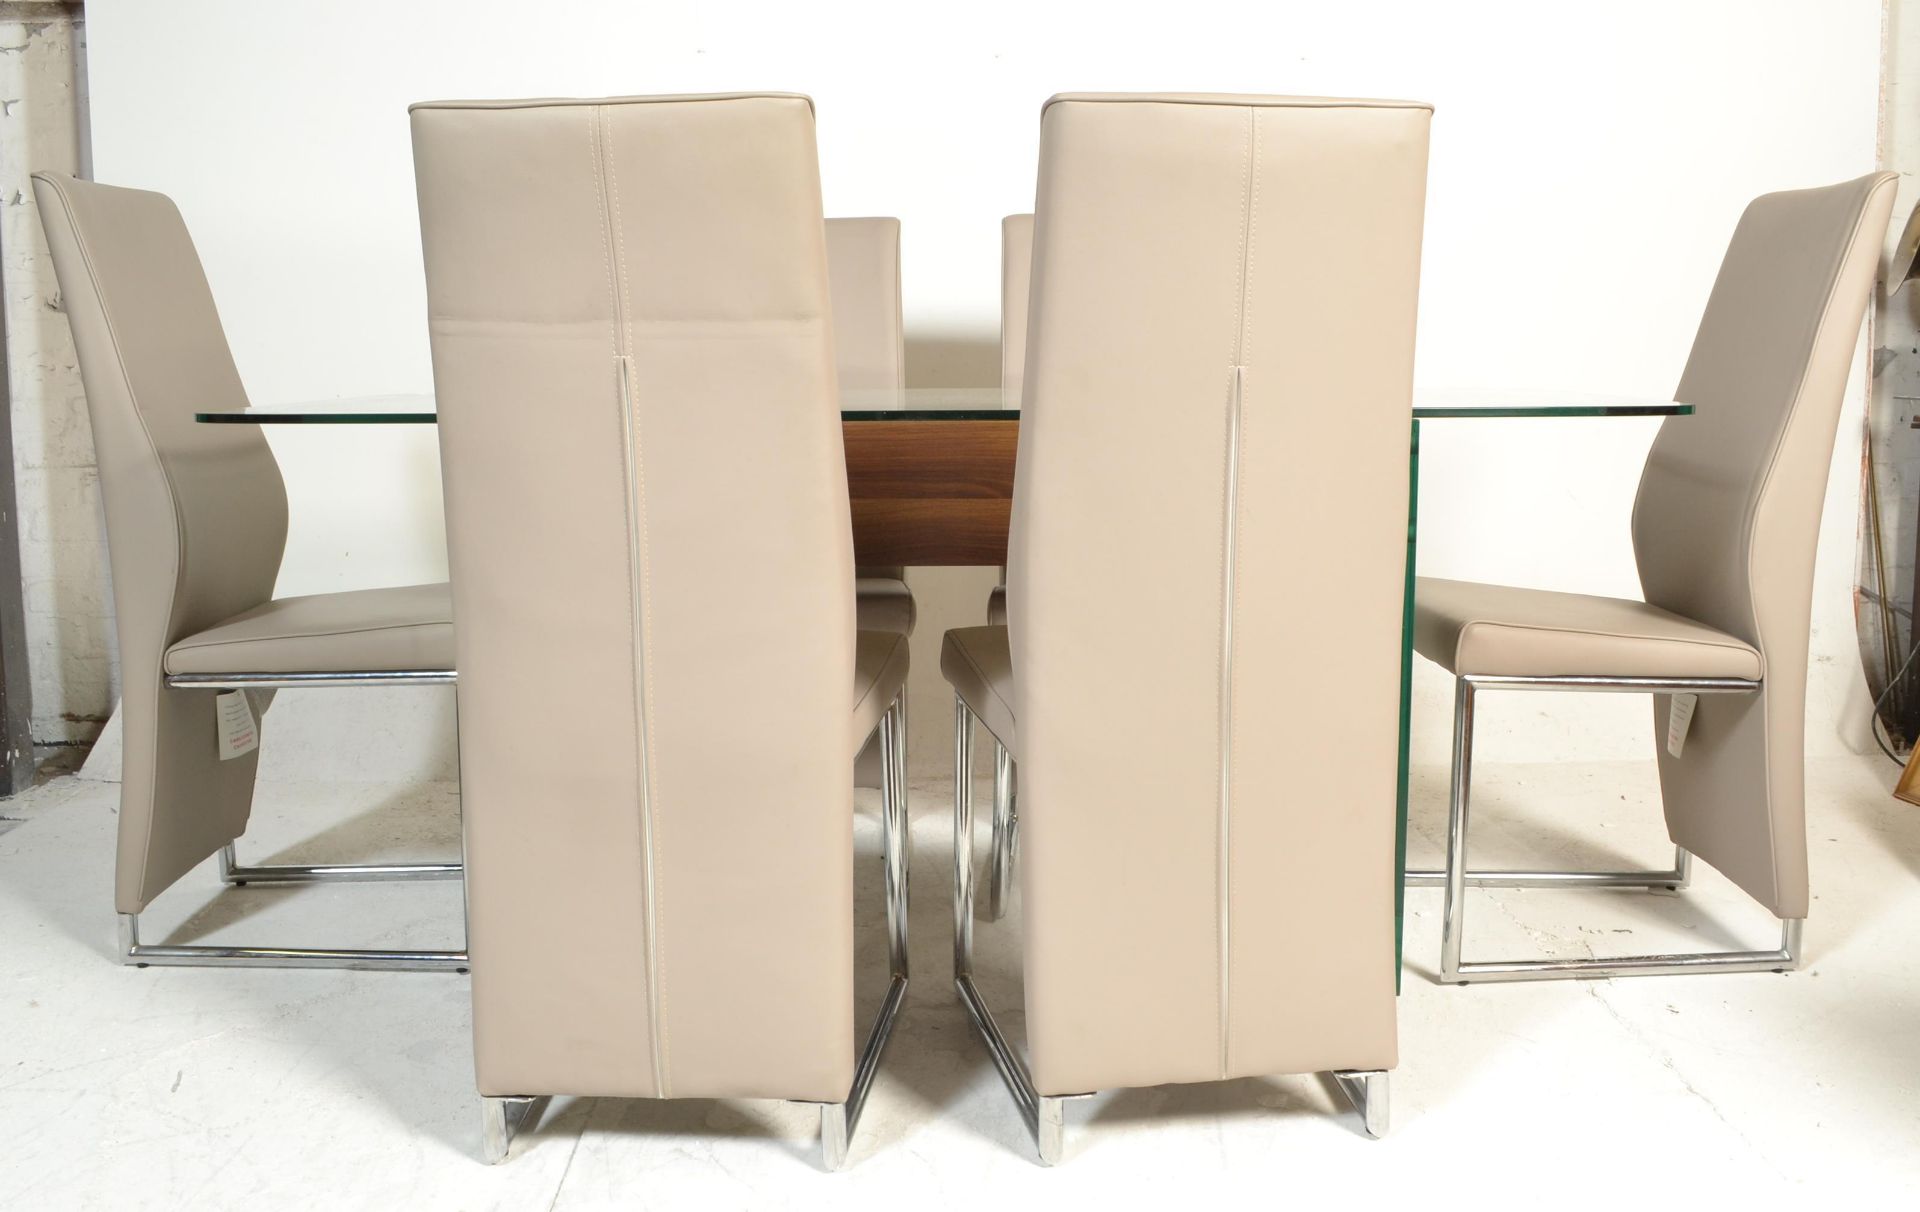 A contemporary large designer modernist glass dining table. Raised on glass panel uprights with